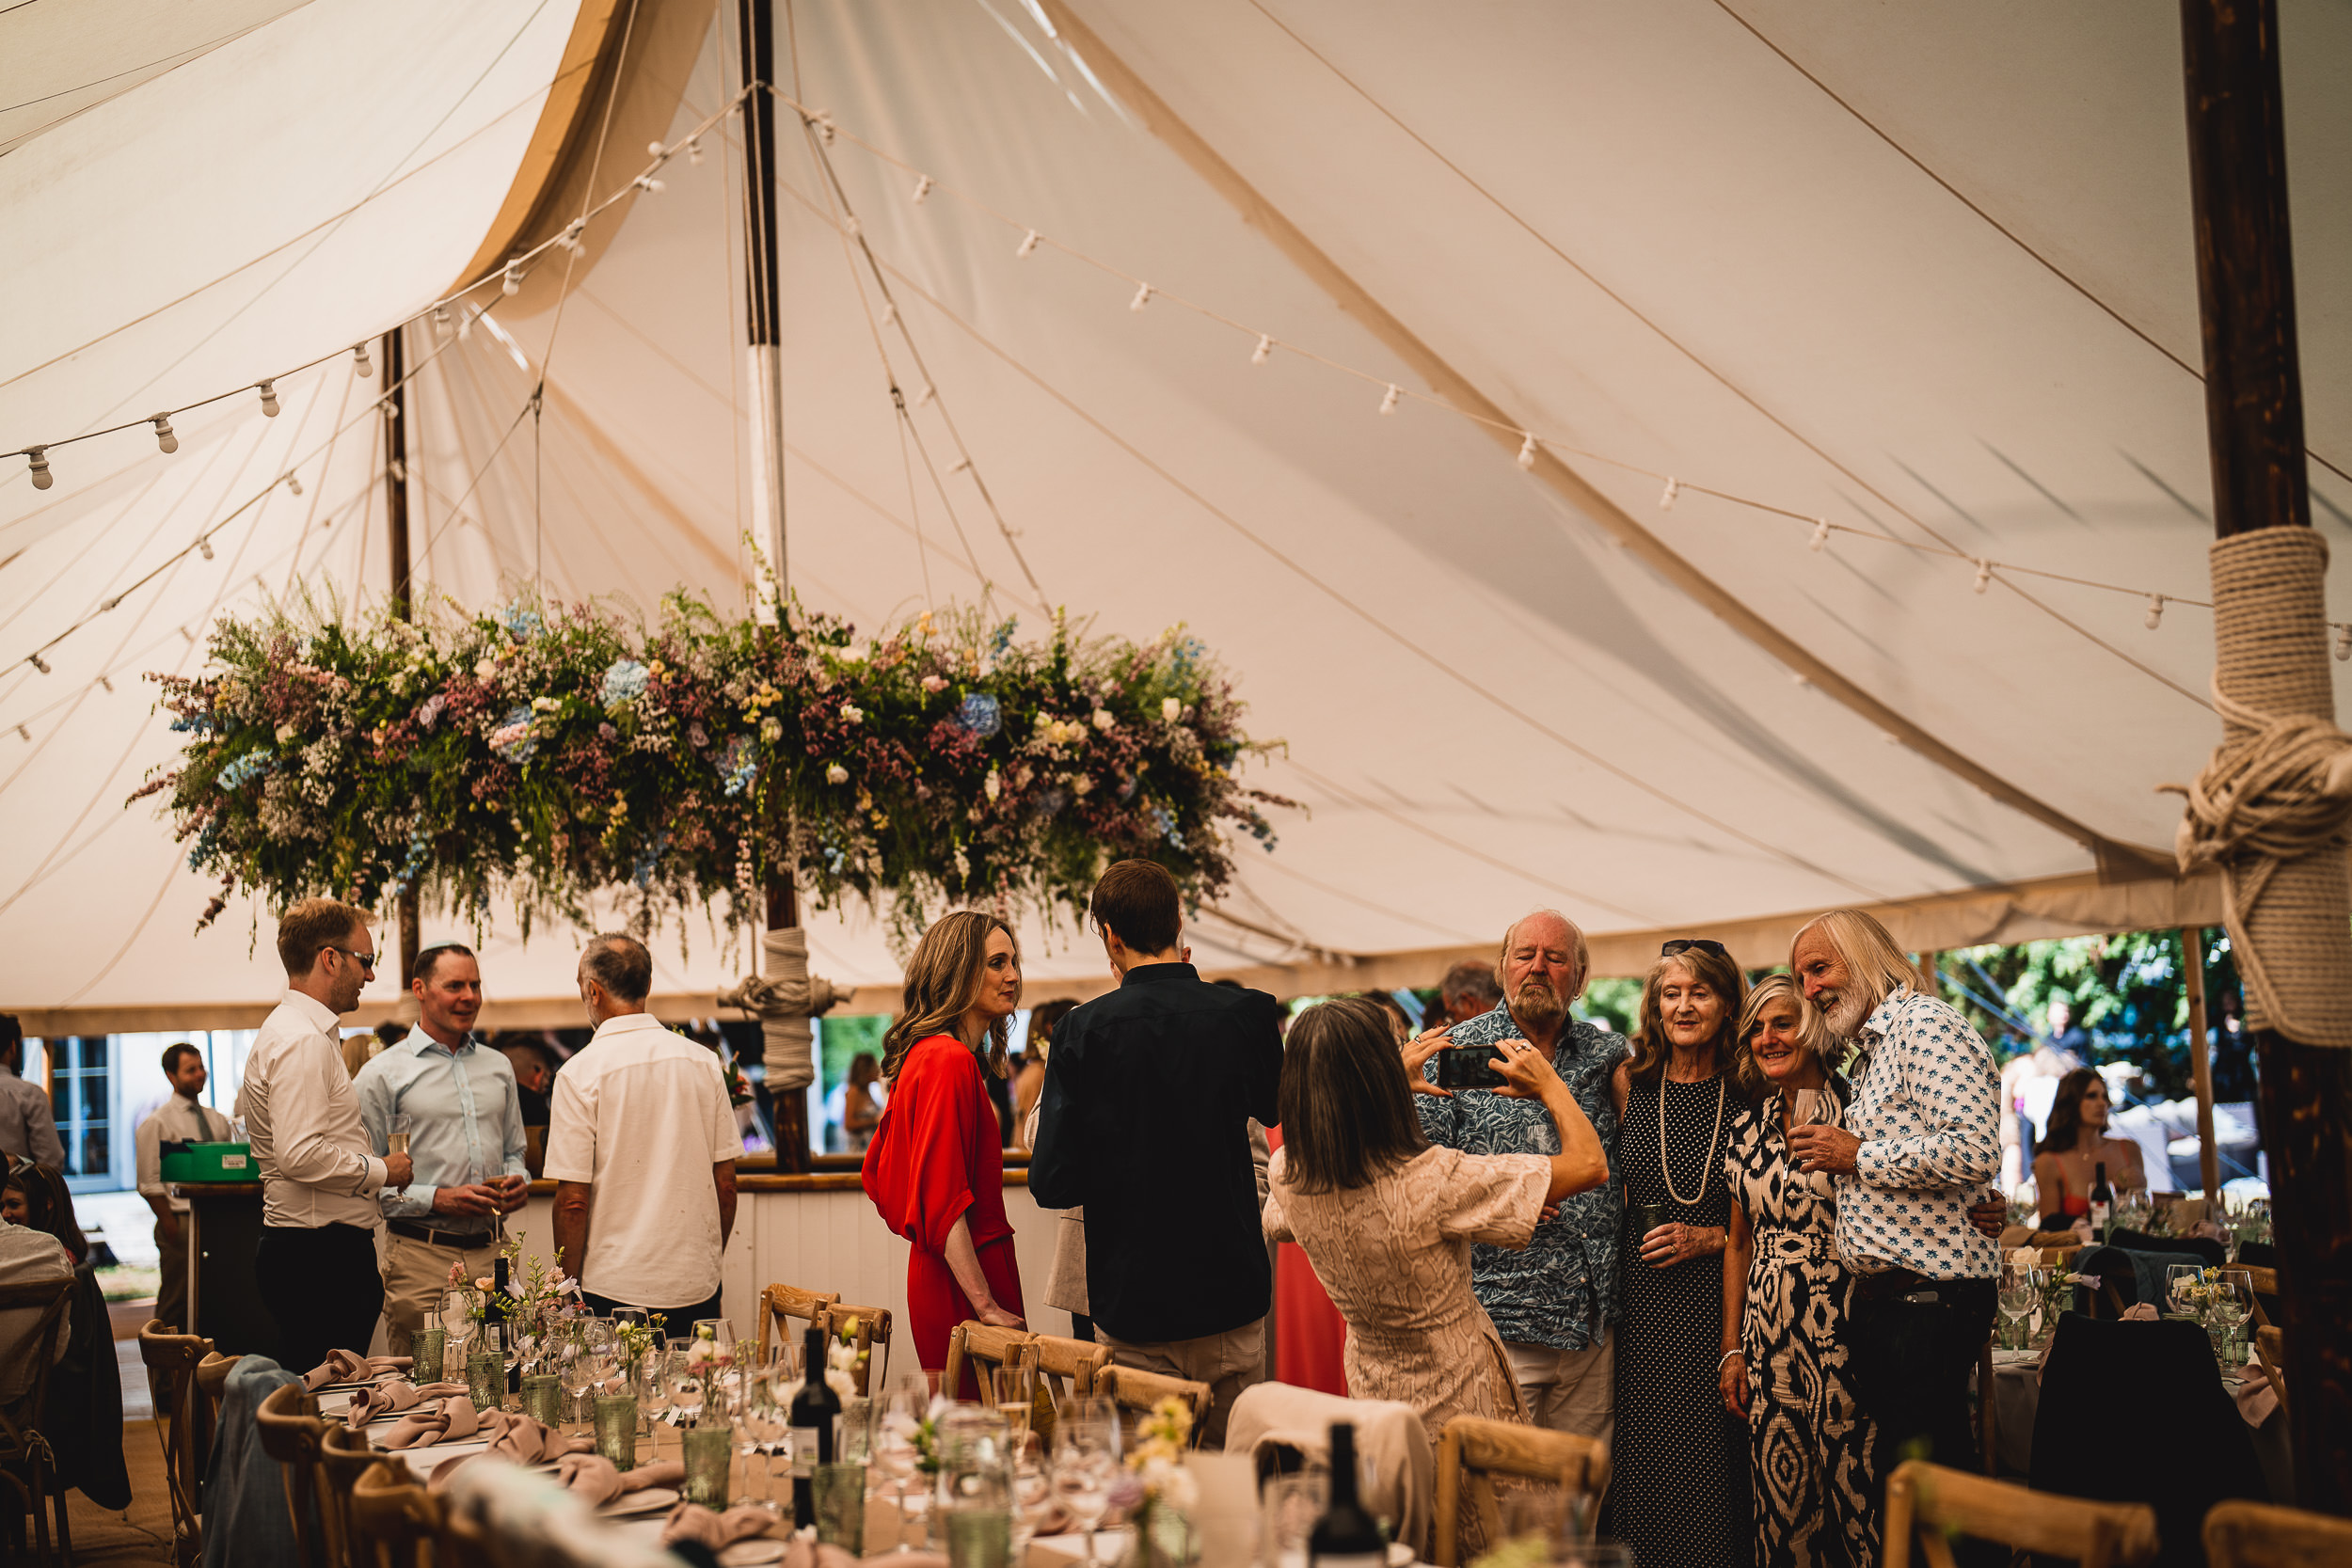 A wedding reception with tables and chairs in a tent.